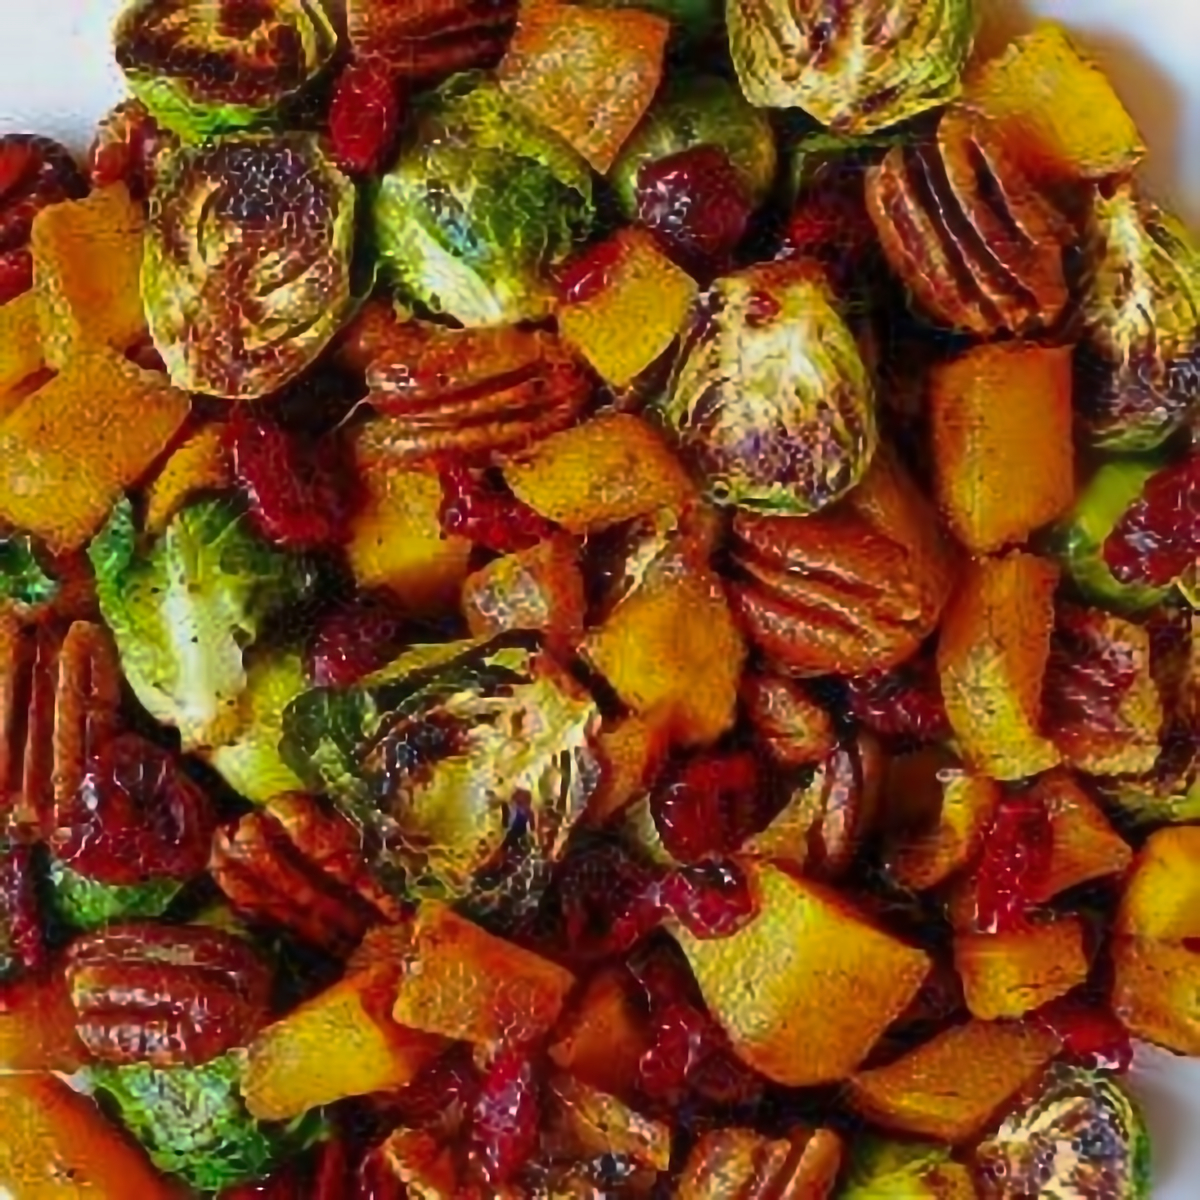 23. Roasted Brussels Sprouts and Cinnamon Butternut Squash with Pecans and Cranberries